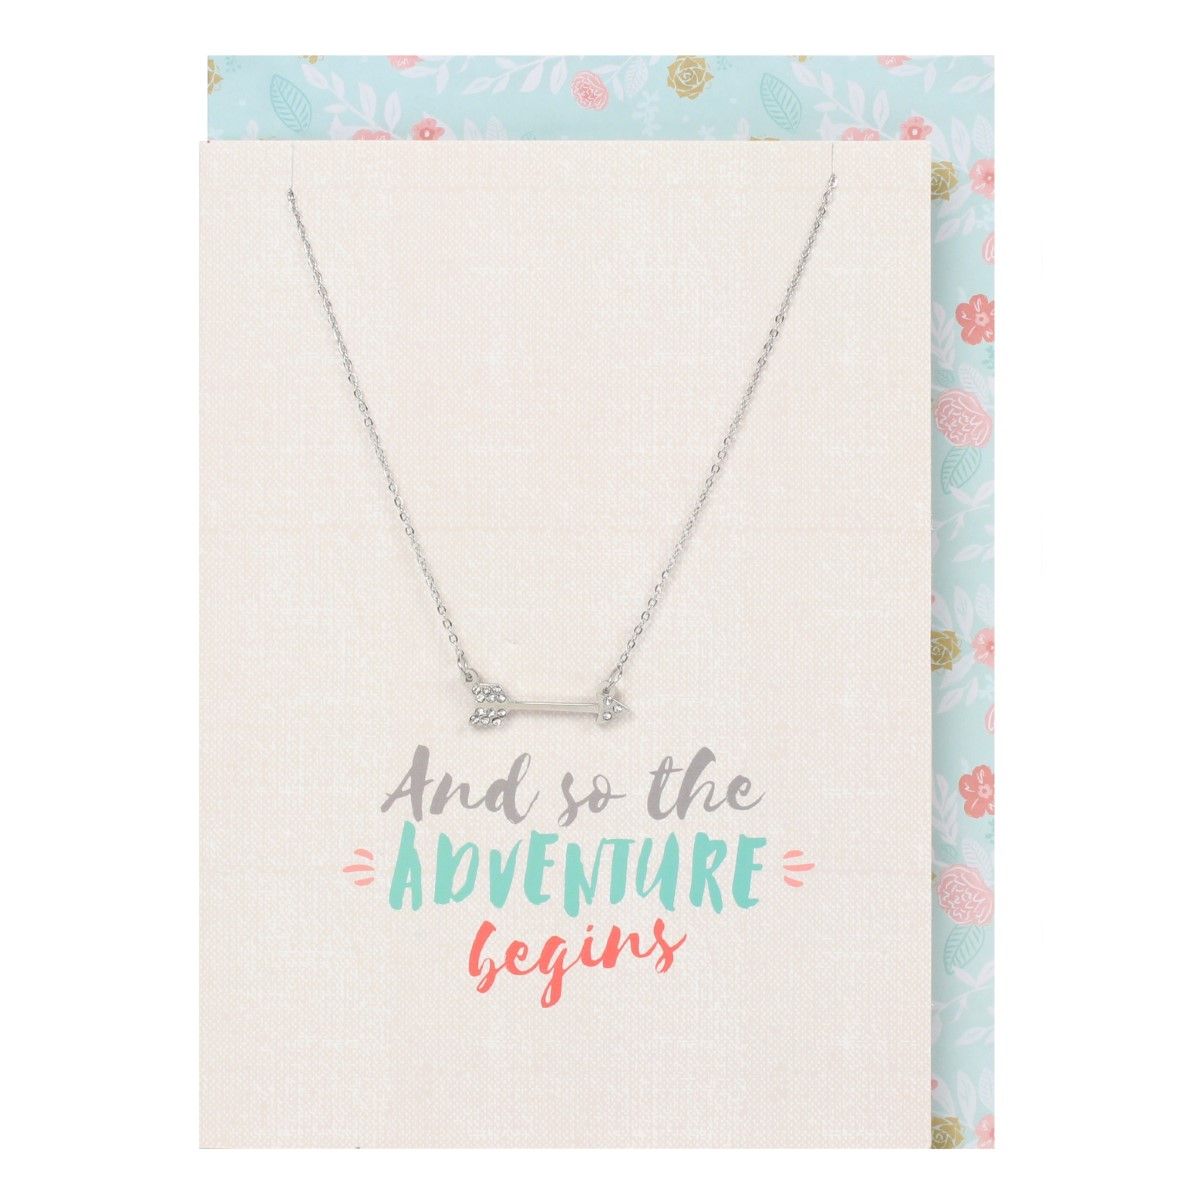 So The Adventure Begins Necklace & Card